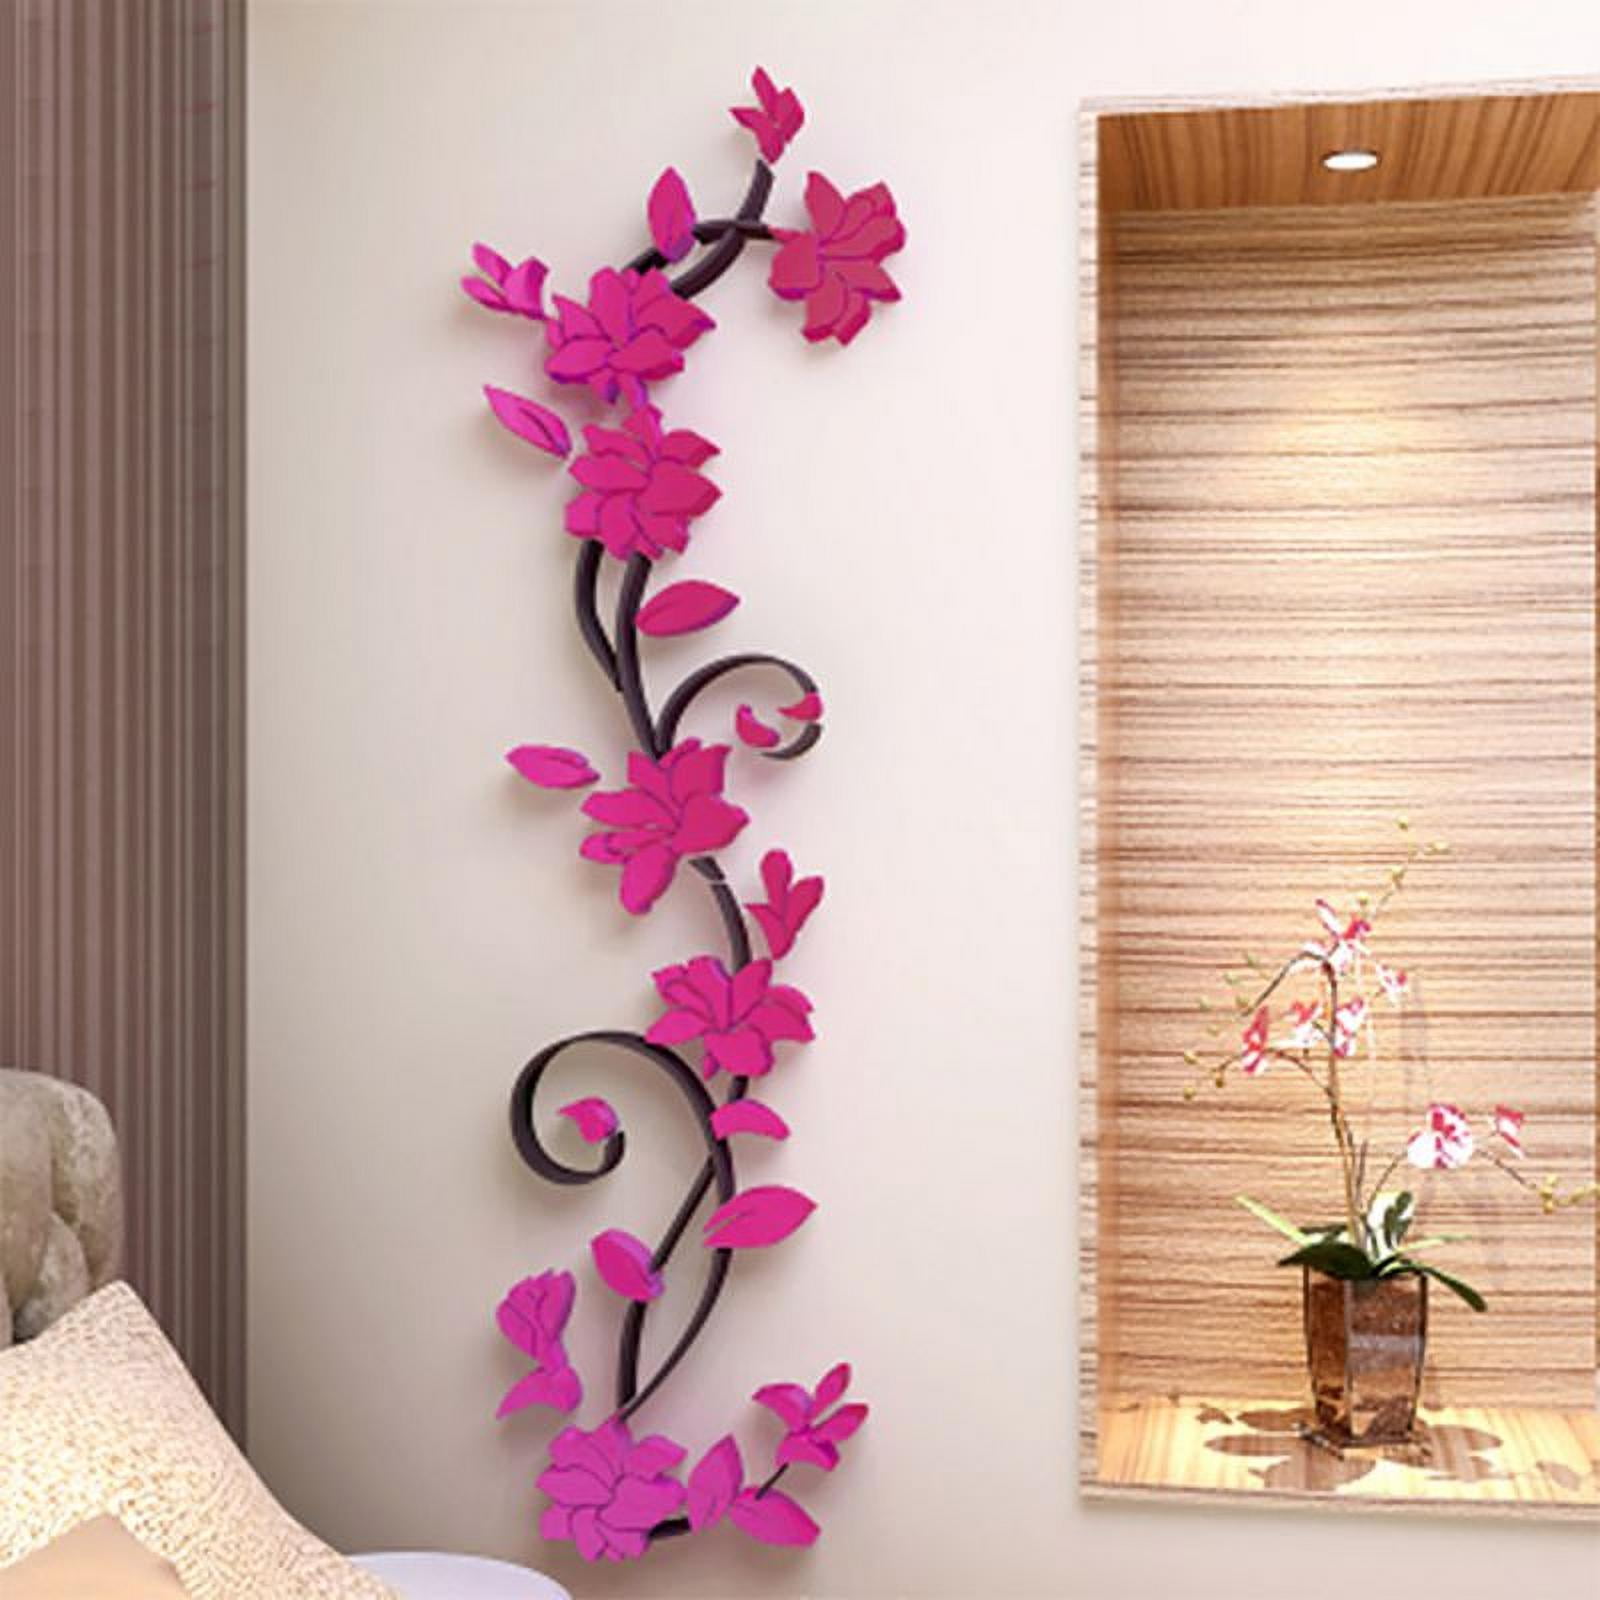 3D Mirror Flower Wall Stickers  DIY Art Decal Bathroom Home Decoration Acces 